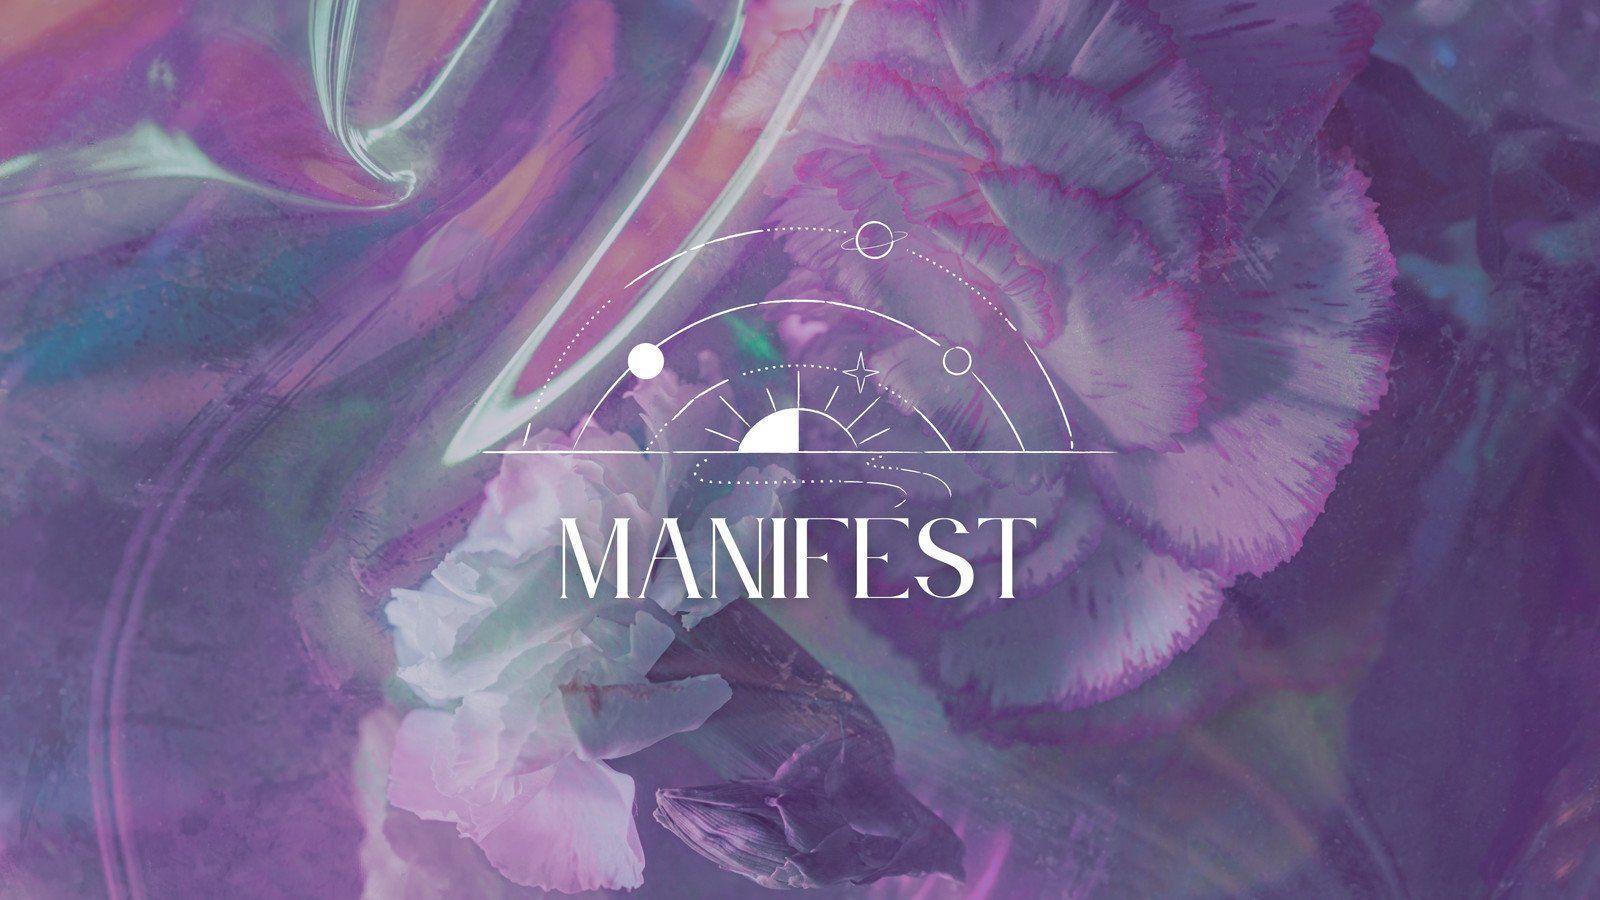 Manifest logo with a purple and pink background - Mermaid, violet, design, purple